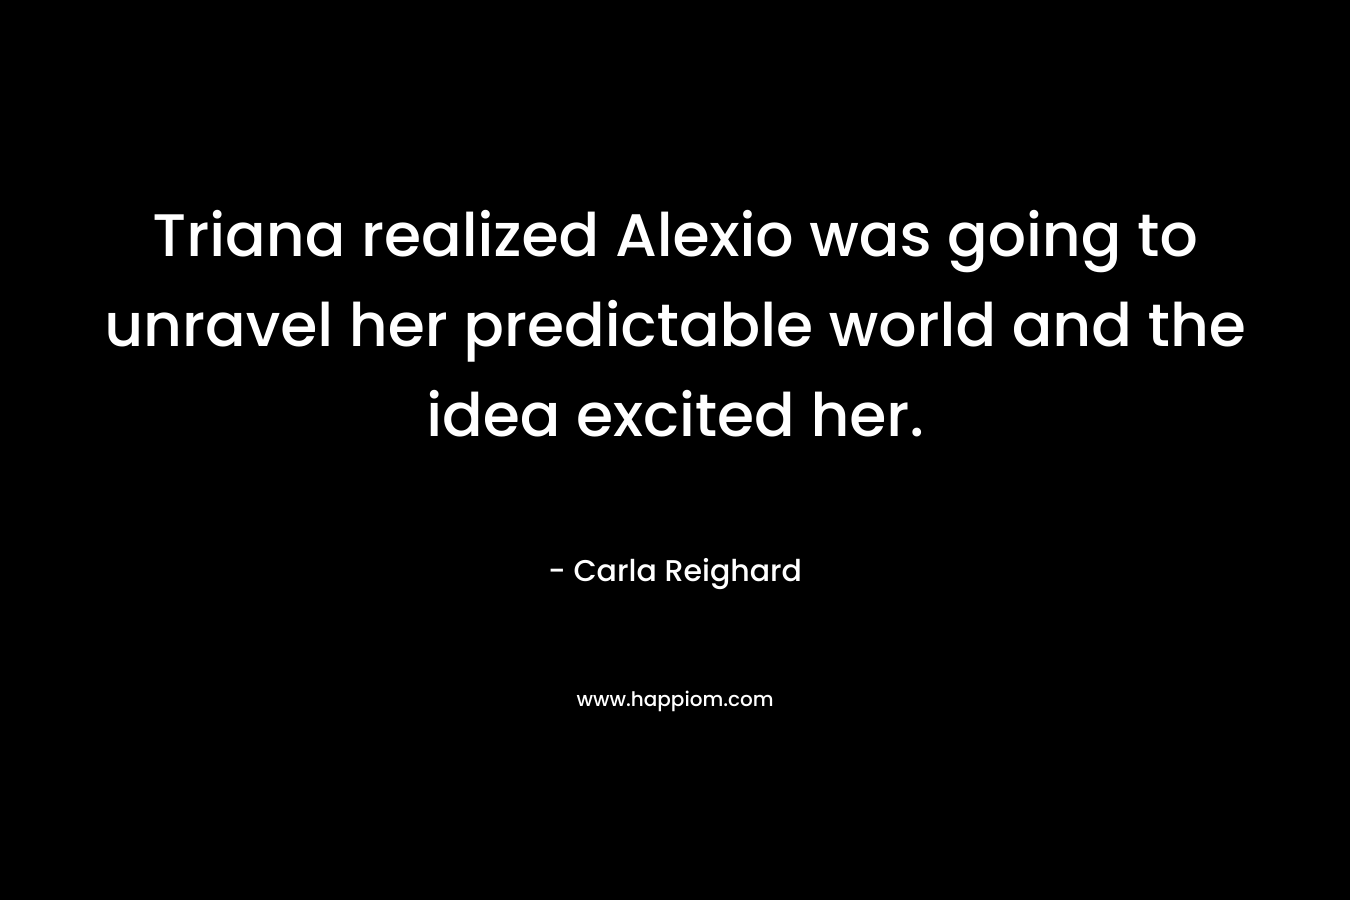 Triana realized Alexio was going to unravel her predictable world and the idea excited her. – Carla Reighard